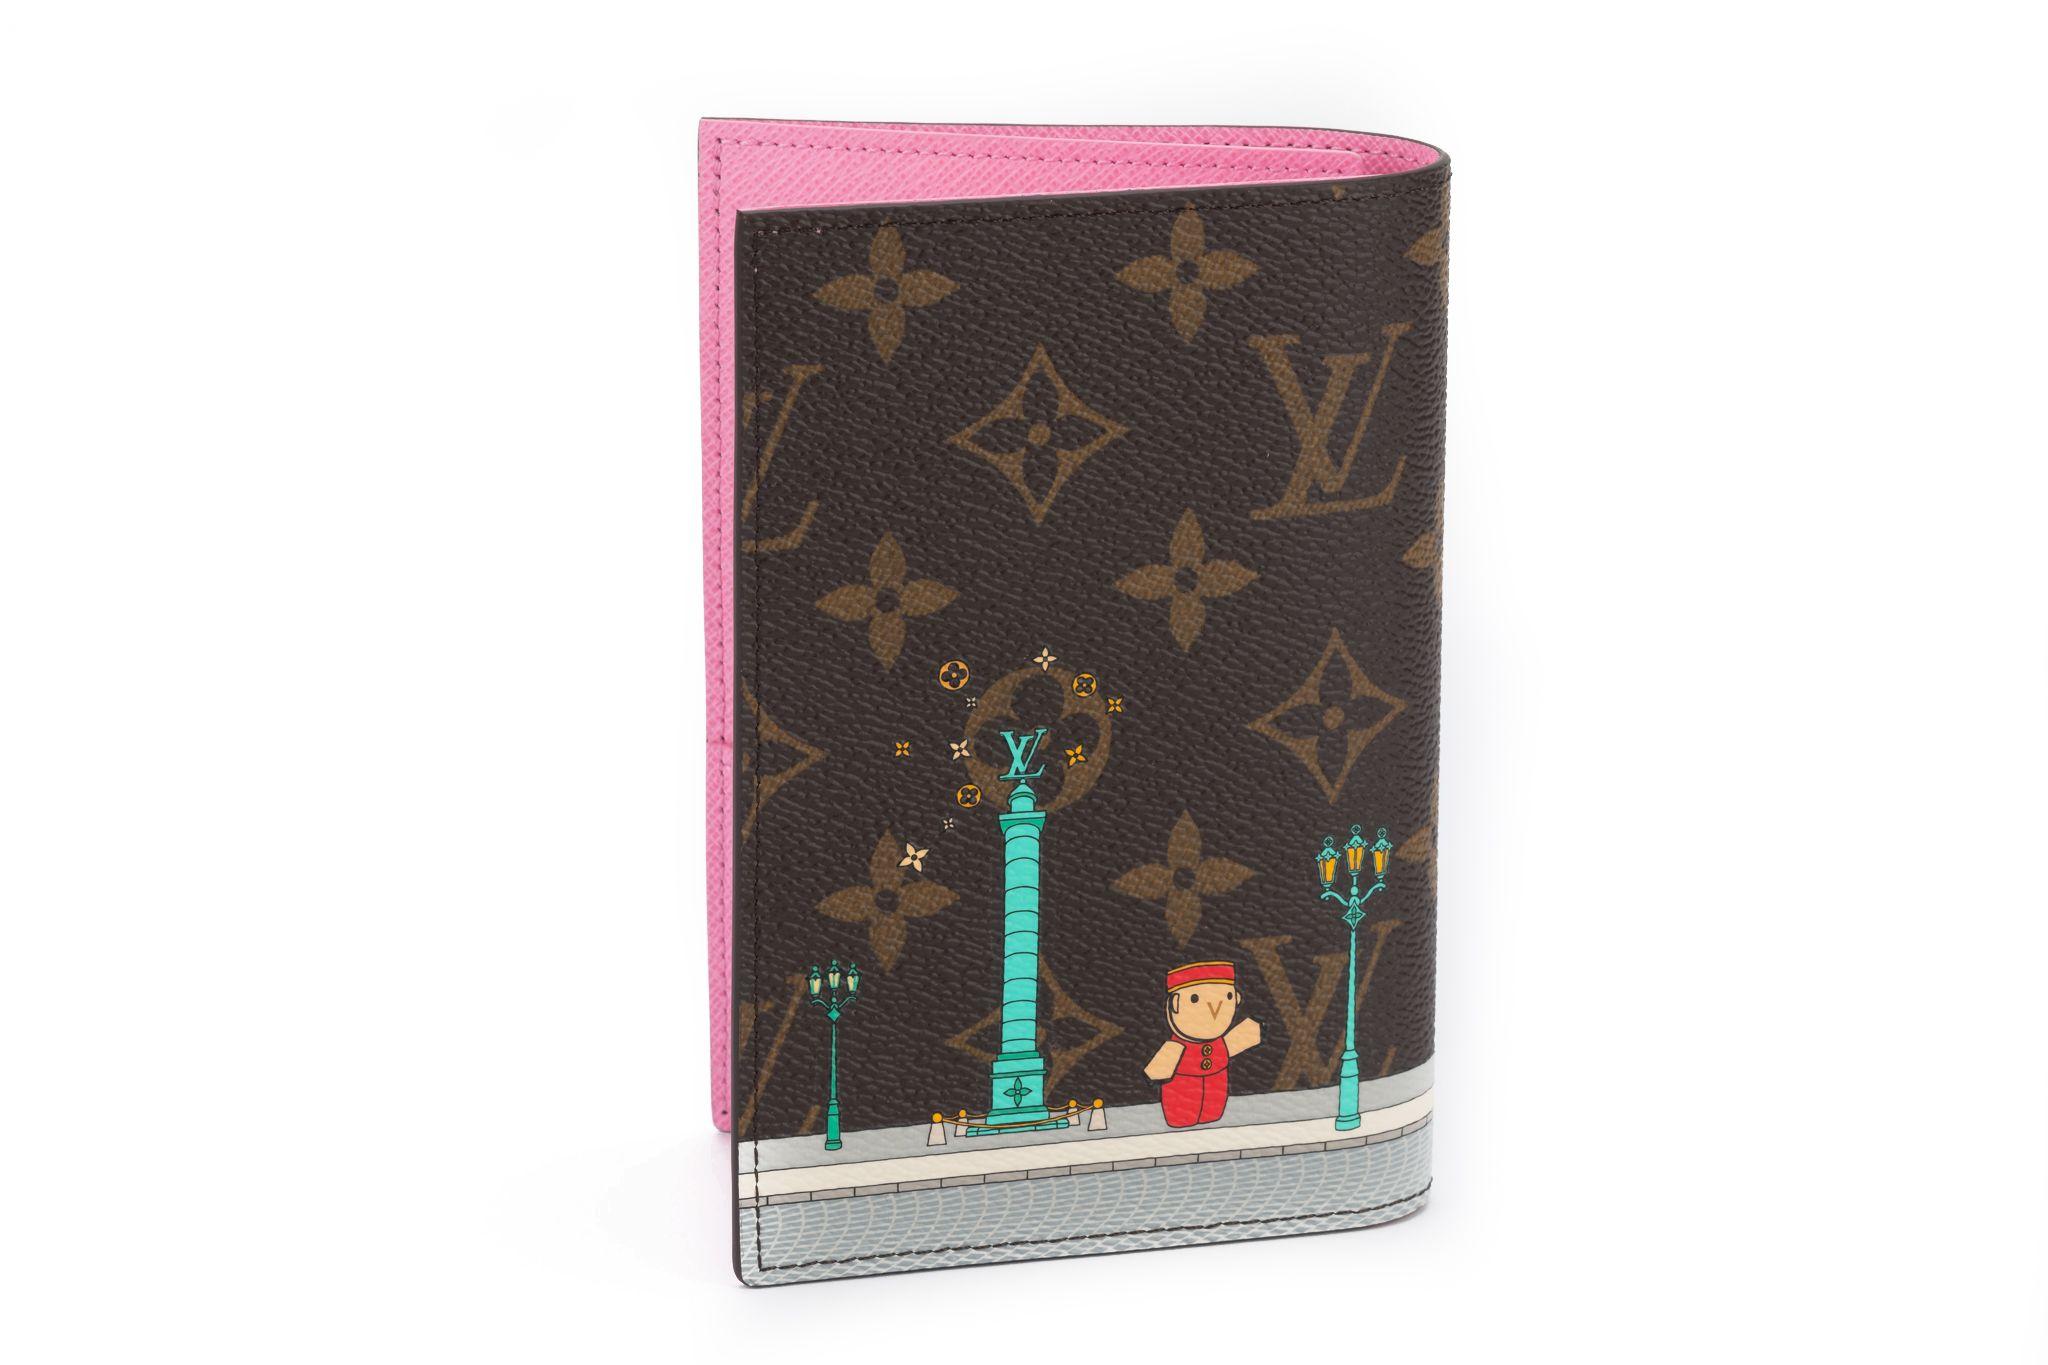 Louis Vuitton Passport Cover in pink belongs to the Vivienne Holidays 2022 collection. Very collectible. It's brand new and comes with the original dustcover and box.